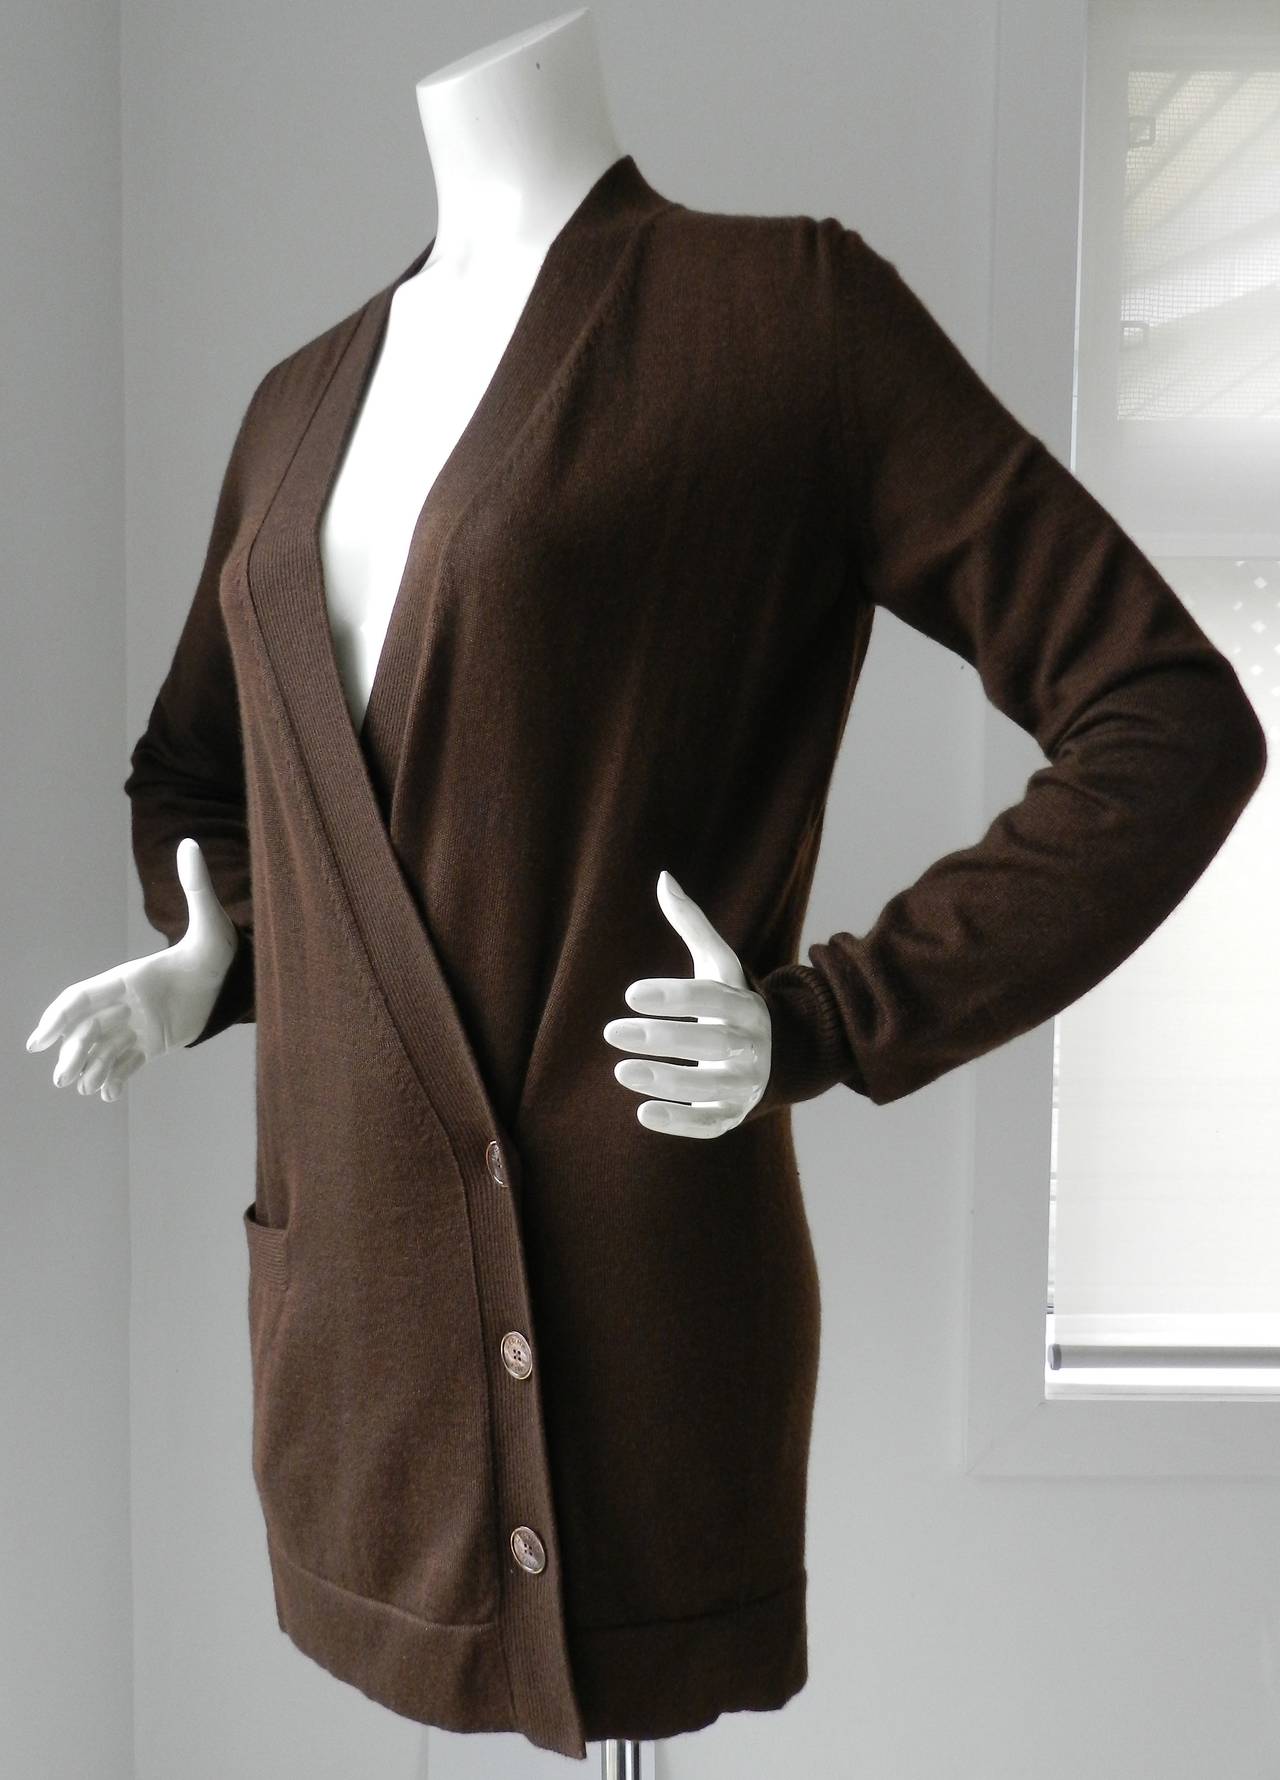 Hermes brown cashmere cardigan sweater. Excellent condition. Tagged size FR 38 (will fit USA 6/8). Garment measures 38